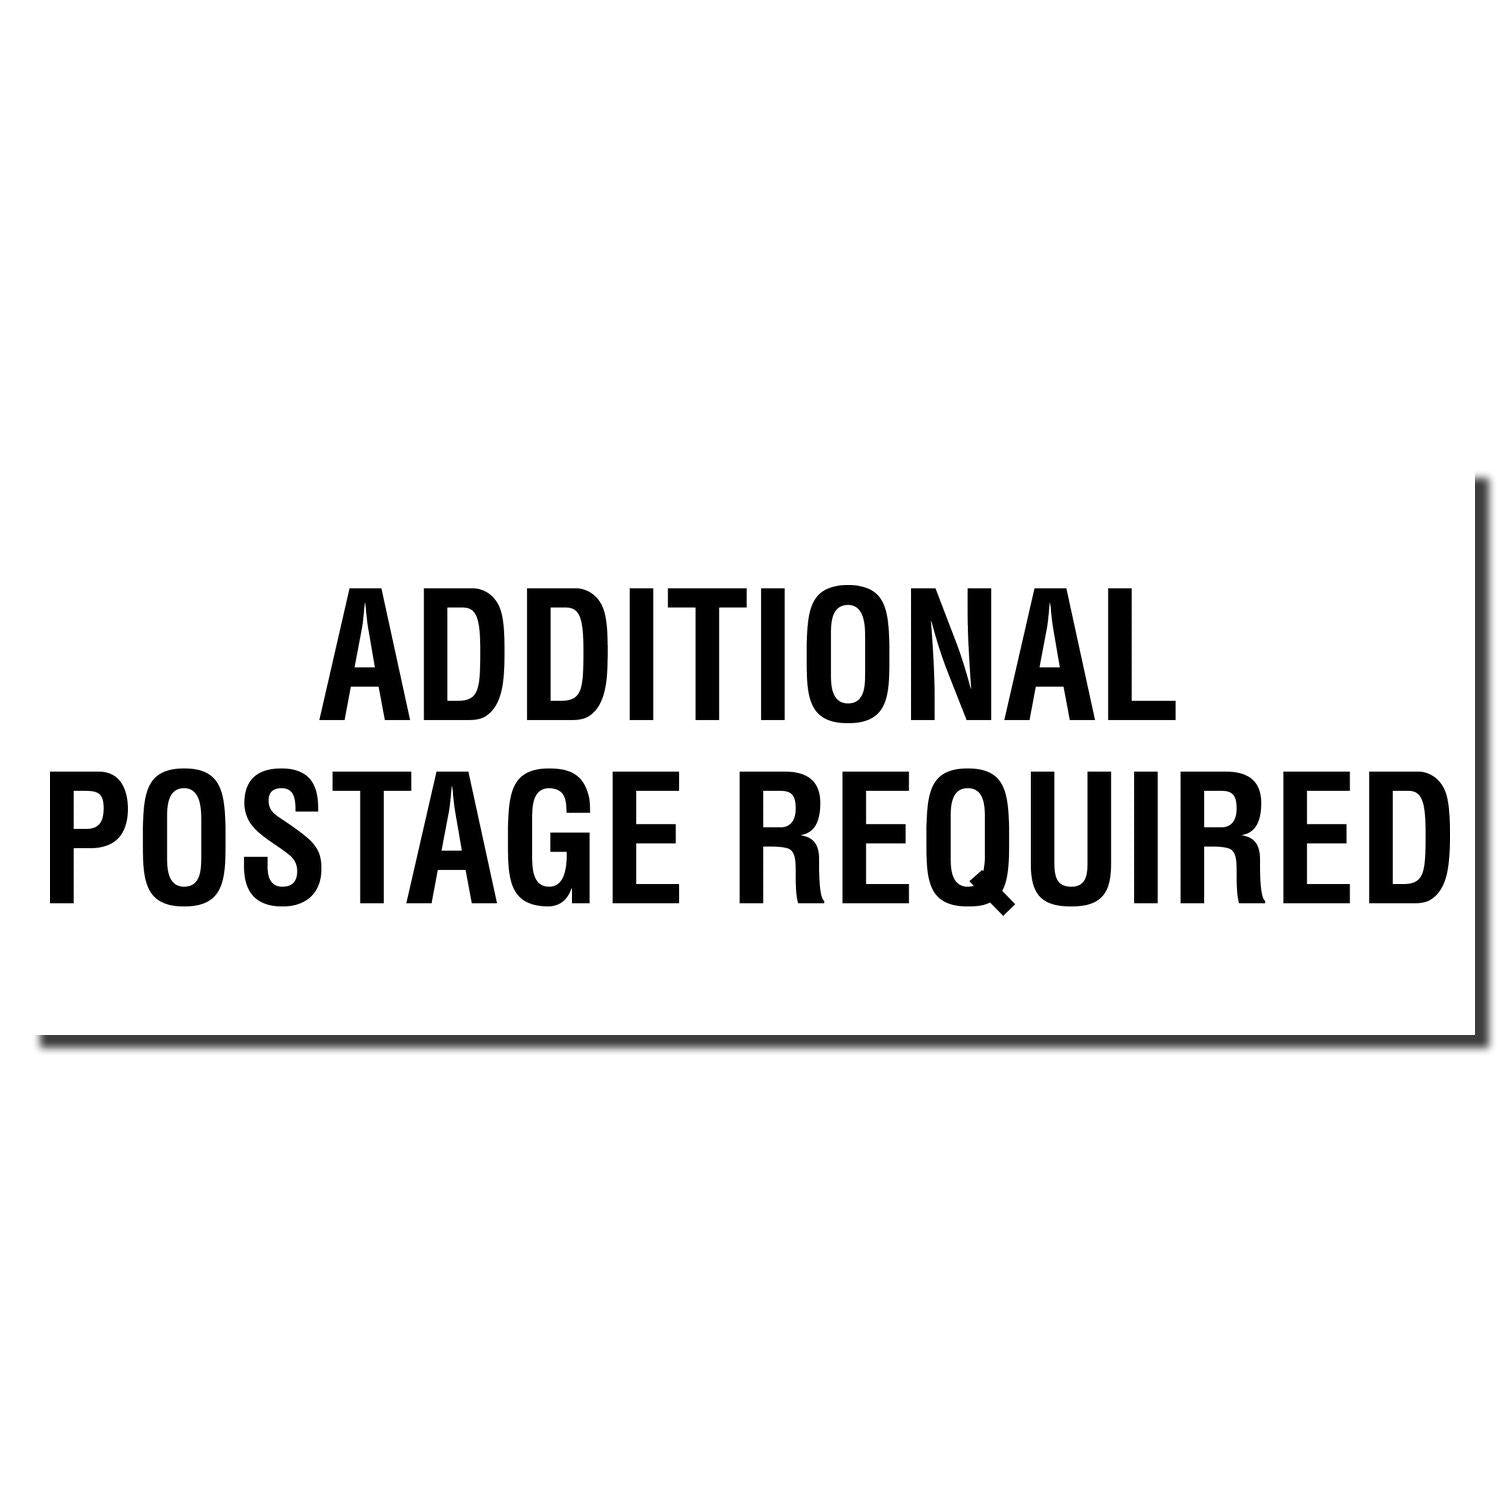 Slim Pre-Inked Additional Postage Required Stamp - Engineer Seal Stamps - Brand_Slim, Impression Size_Small, Stamp Type_Pre-Inked Stamp, Type of Use_Postal & Mailing